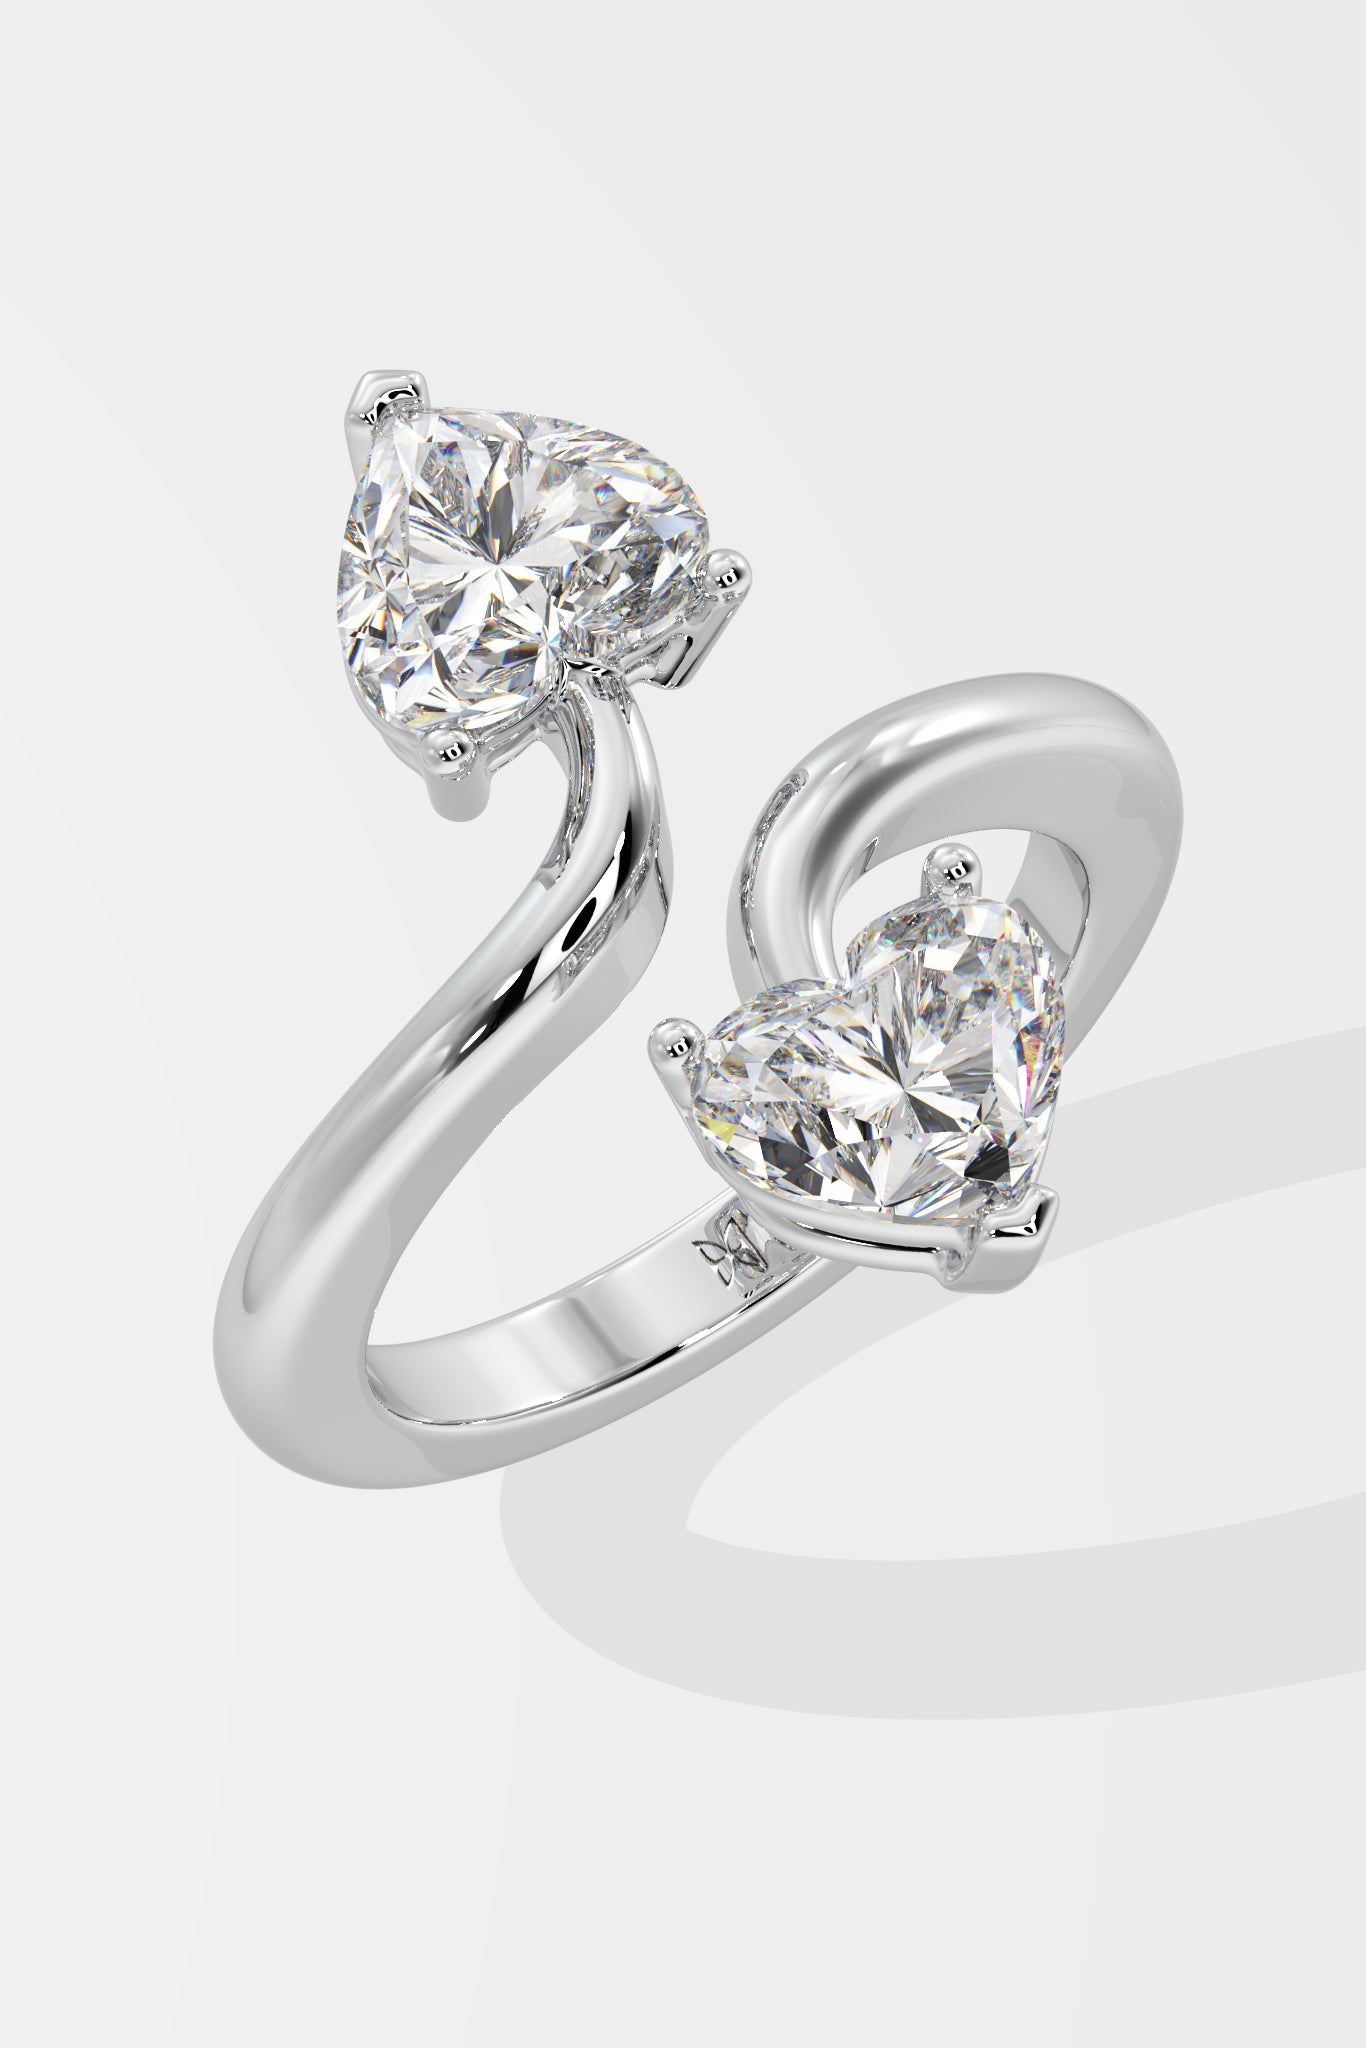 The Two Heart Journey Ring - House Of Quadri